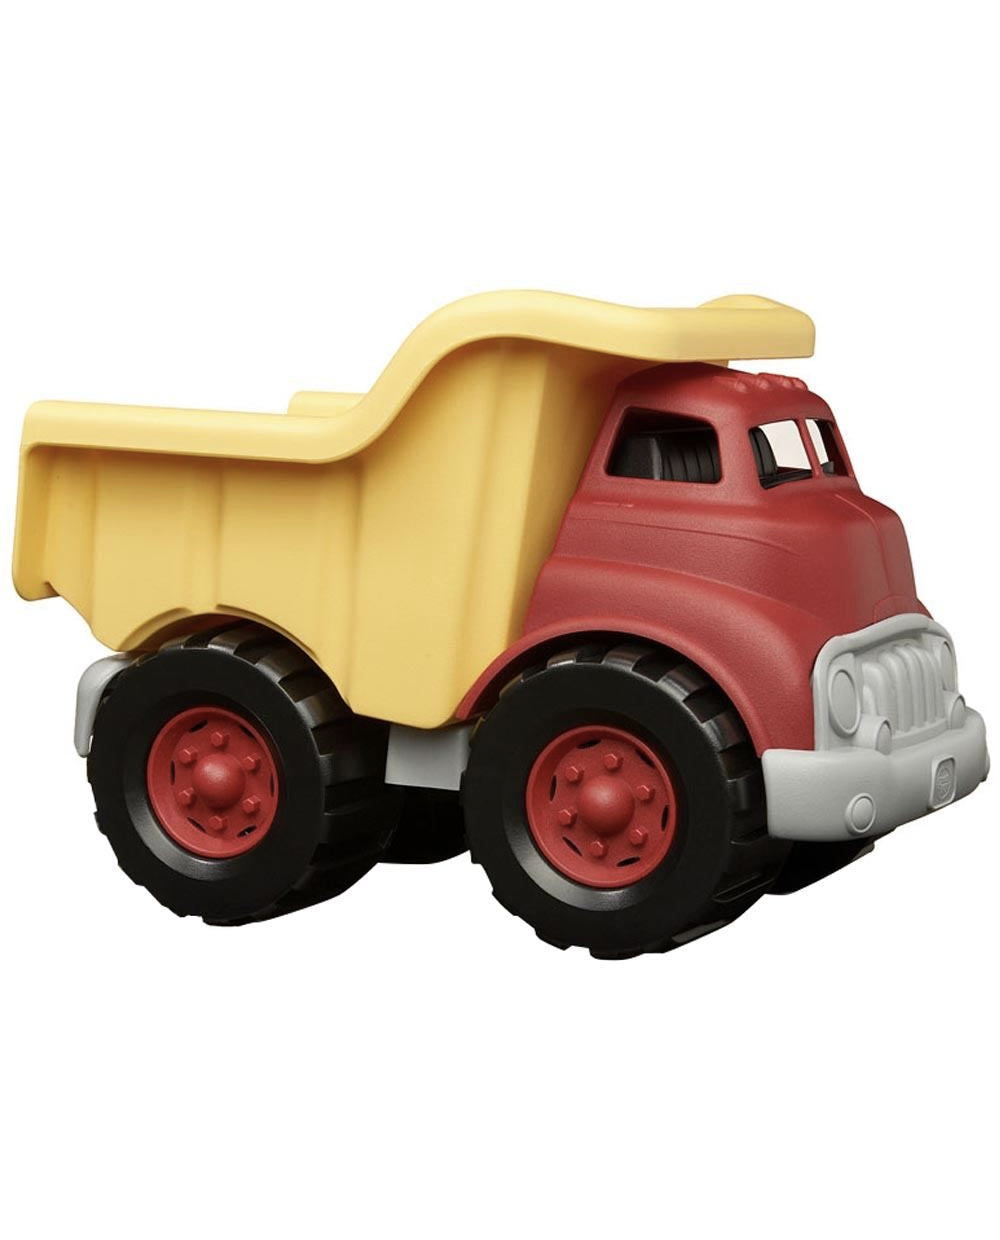 Green Toys Recycled Toys - Dump Truck